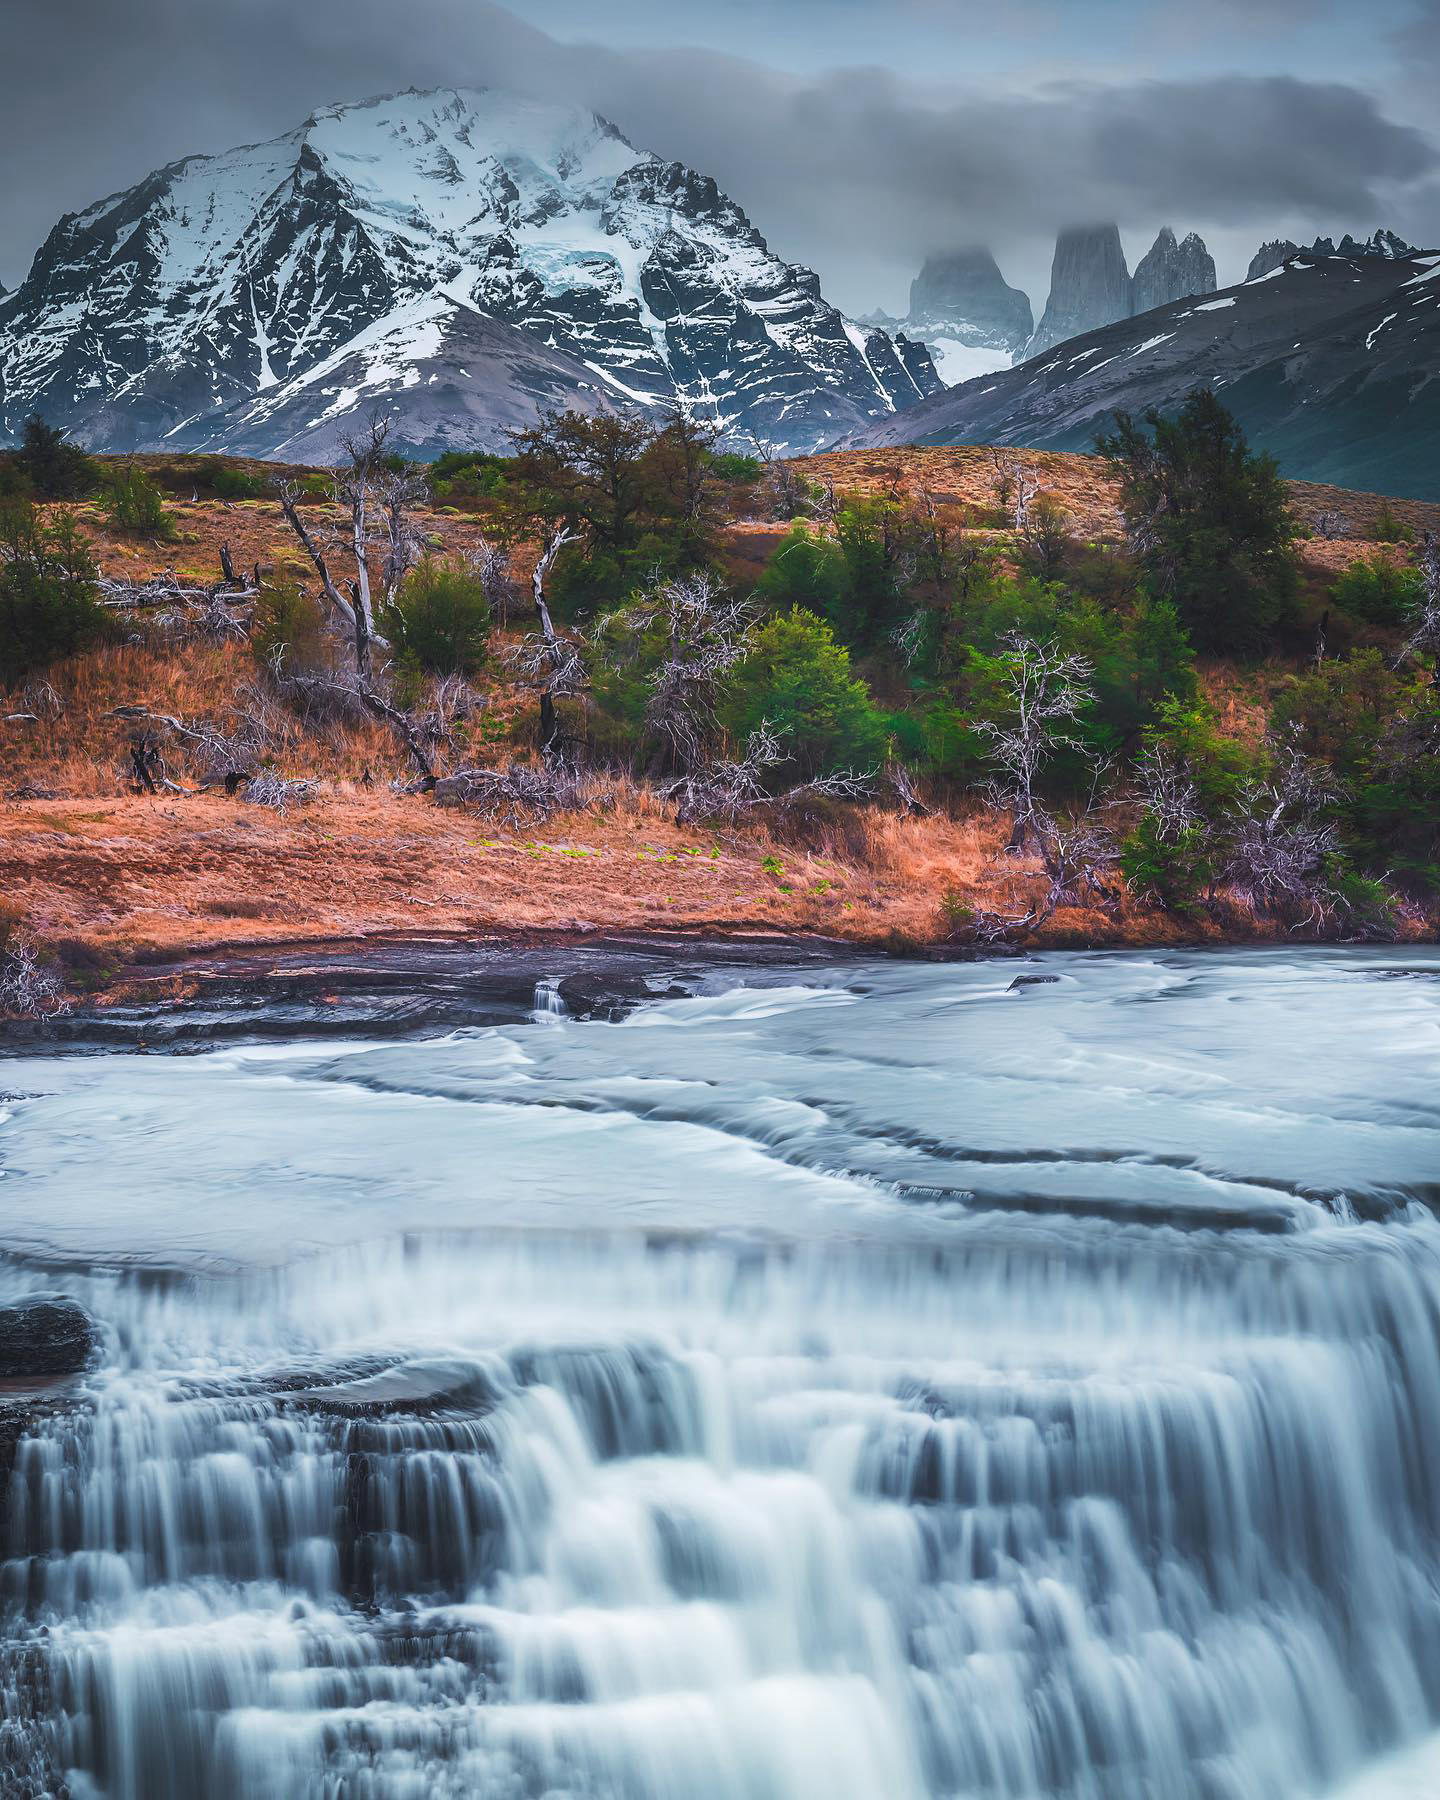 image  1 Waterfalls of Torres del Paine National ParkPatagonia is a dream trip with amazing wildlife (yes we